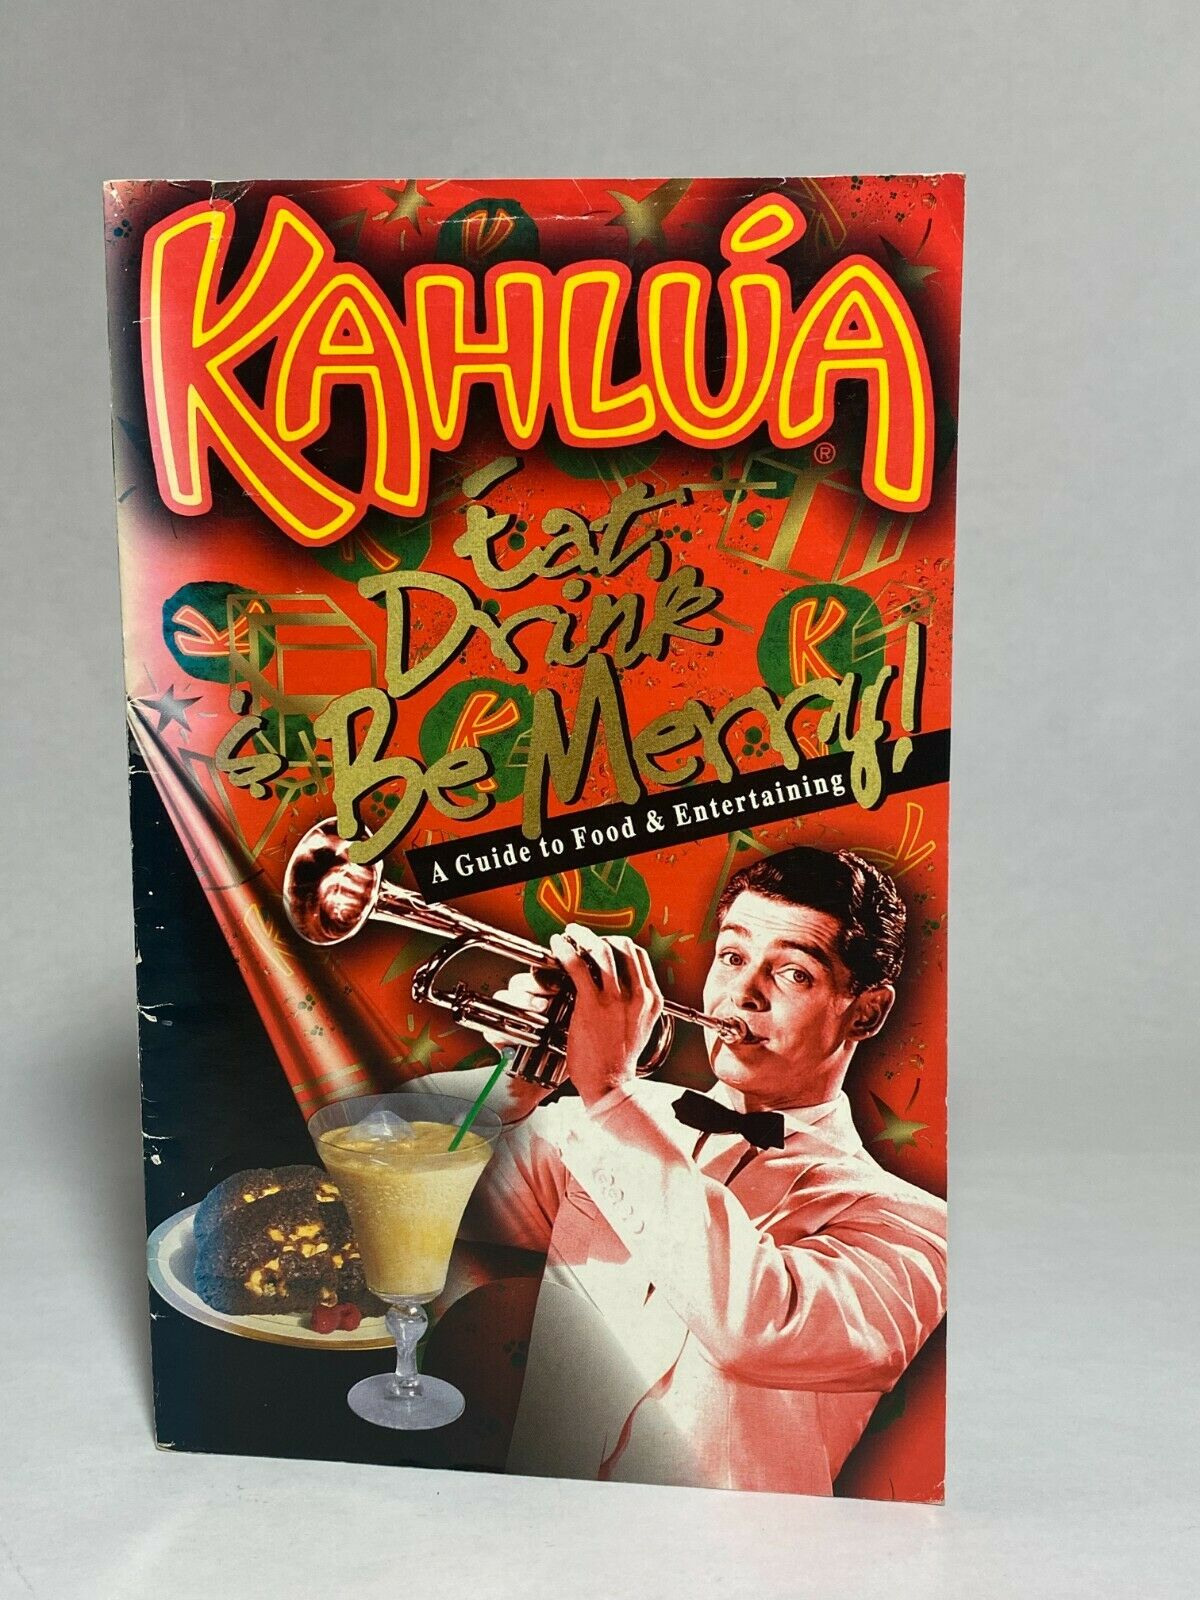 Vtg1997 Recipe Booklet Kahlua Eat Drink & Be Merry Guide To Food Entertaining